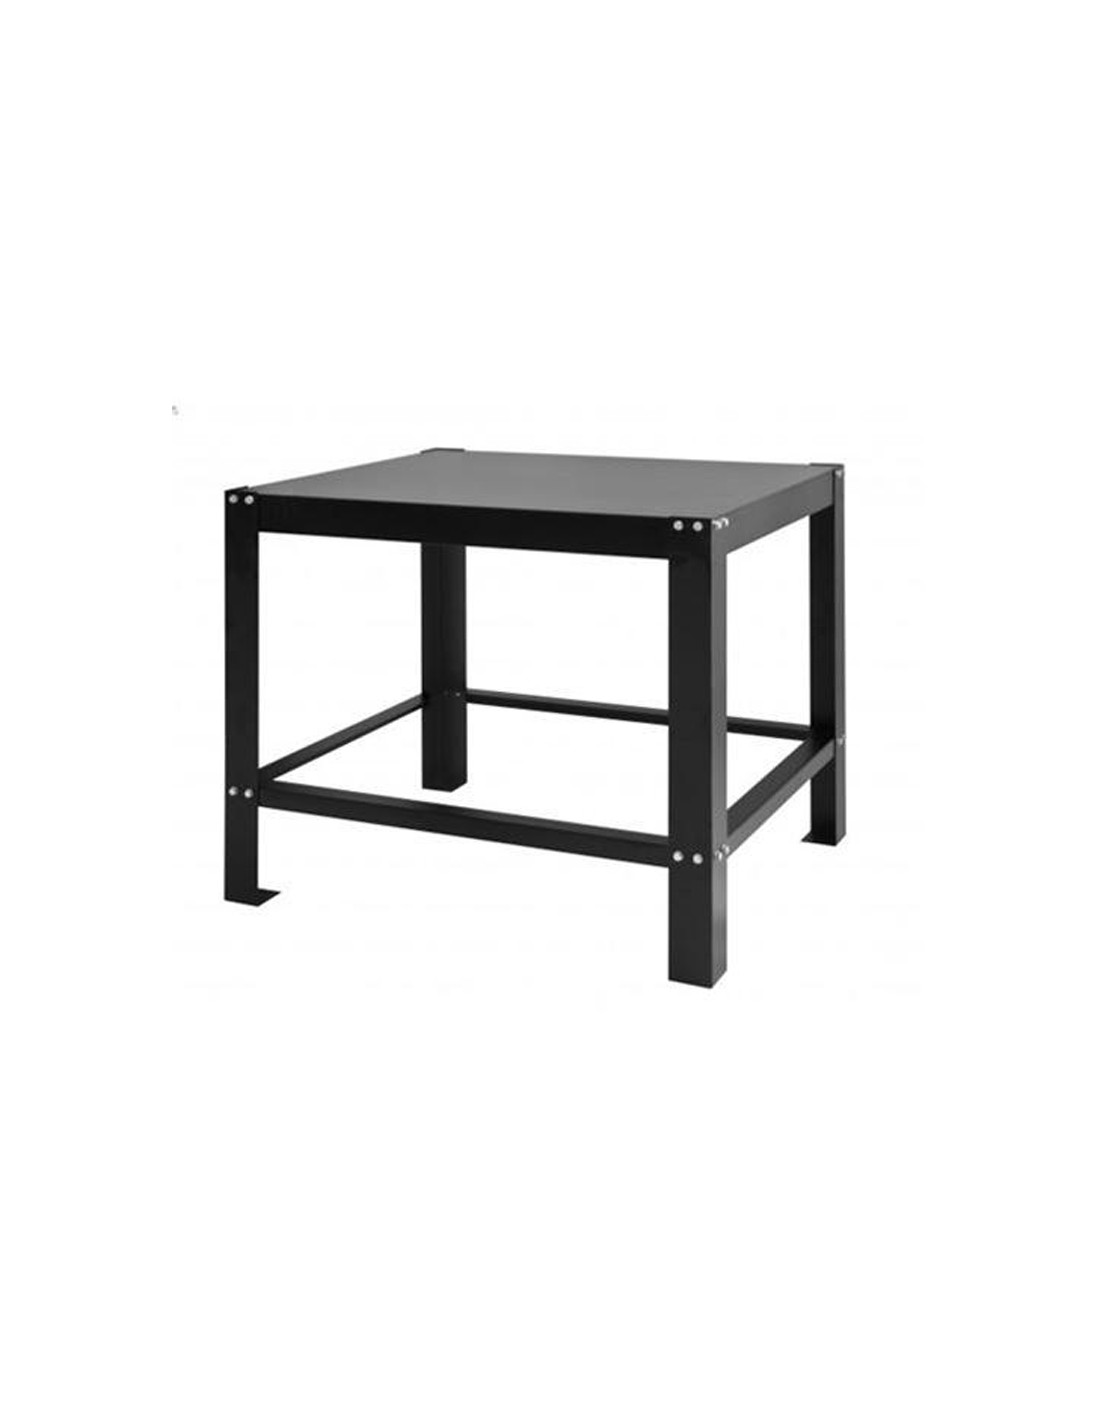 Black painted iron support - Ideal for Trays ovens - Size cm 150.4 x 120.9 x 95.7 h